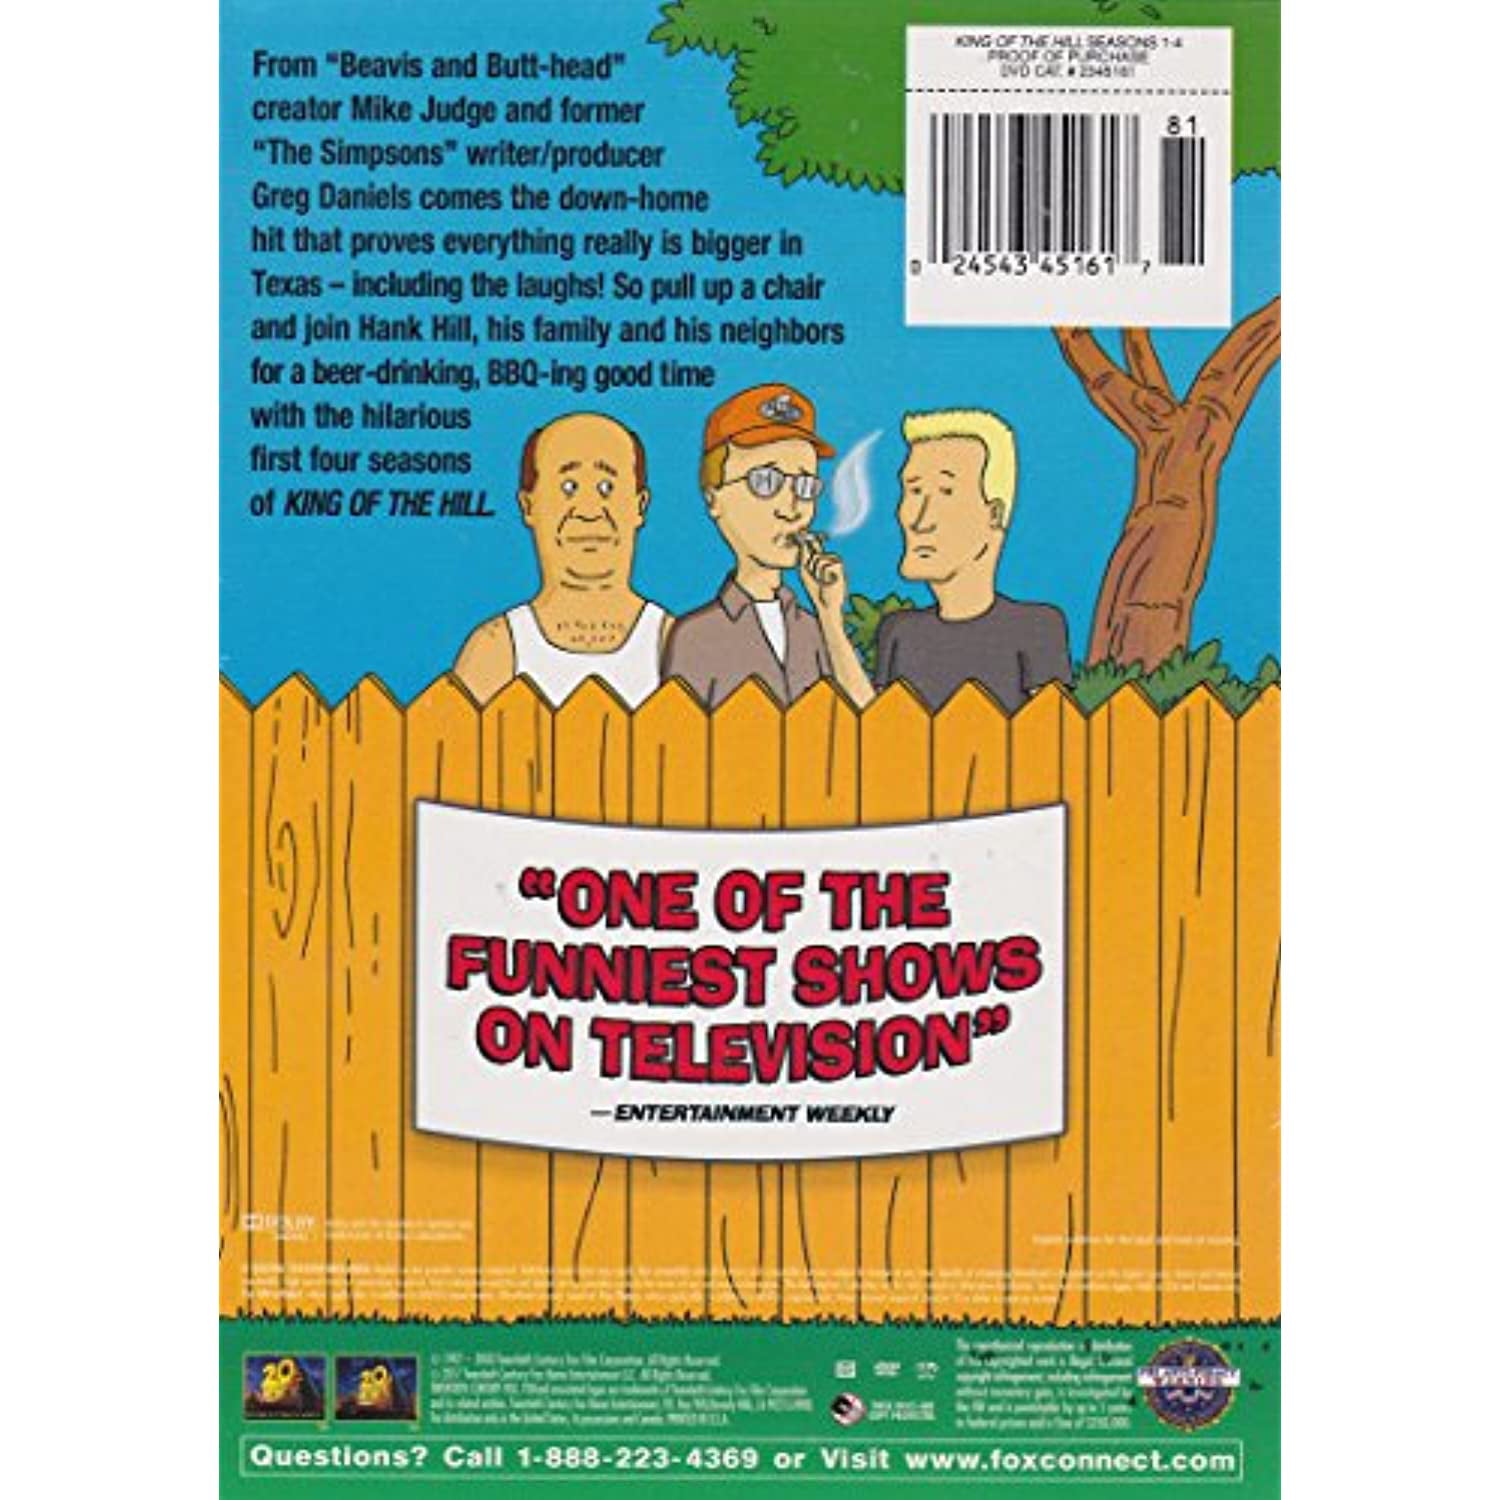  King of The Hill - The Complete Series (DVD, Season 1